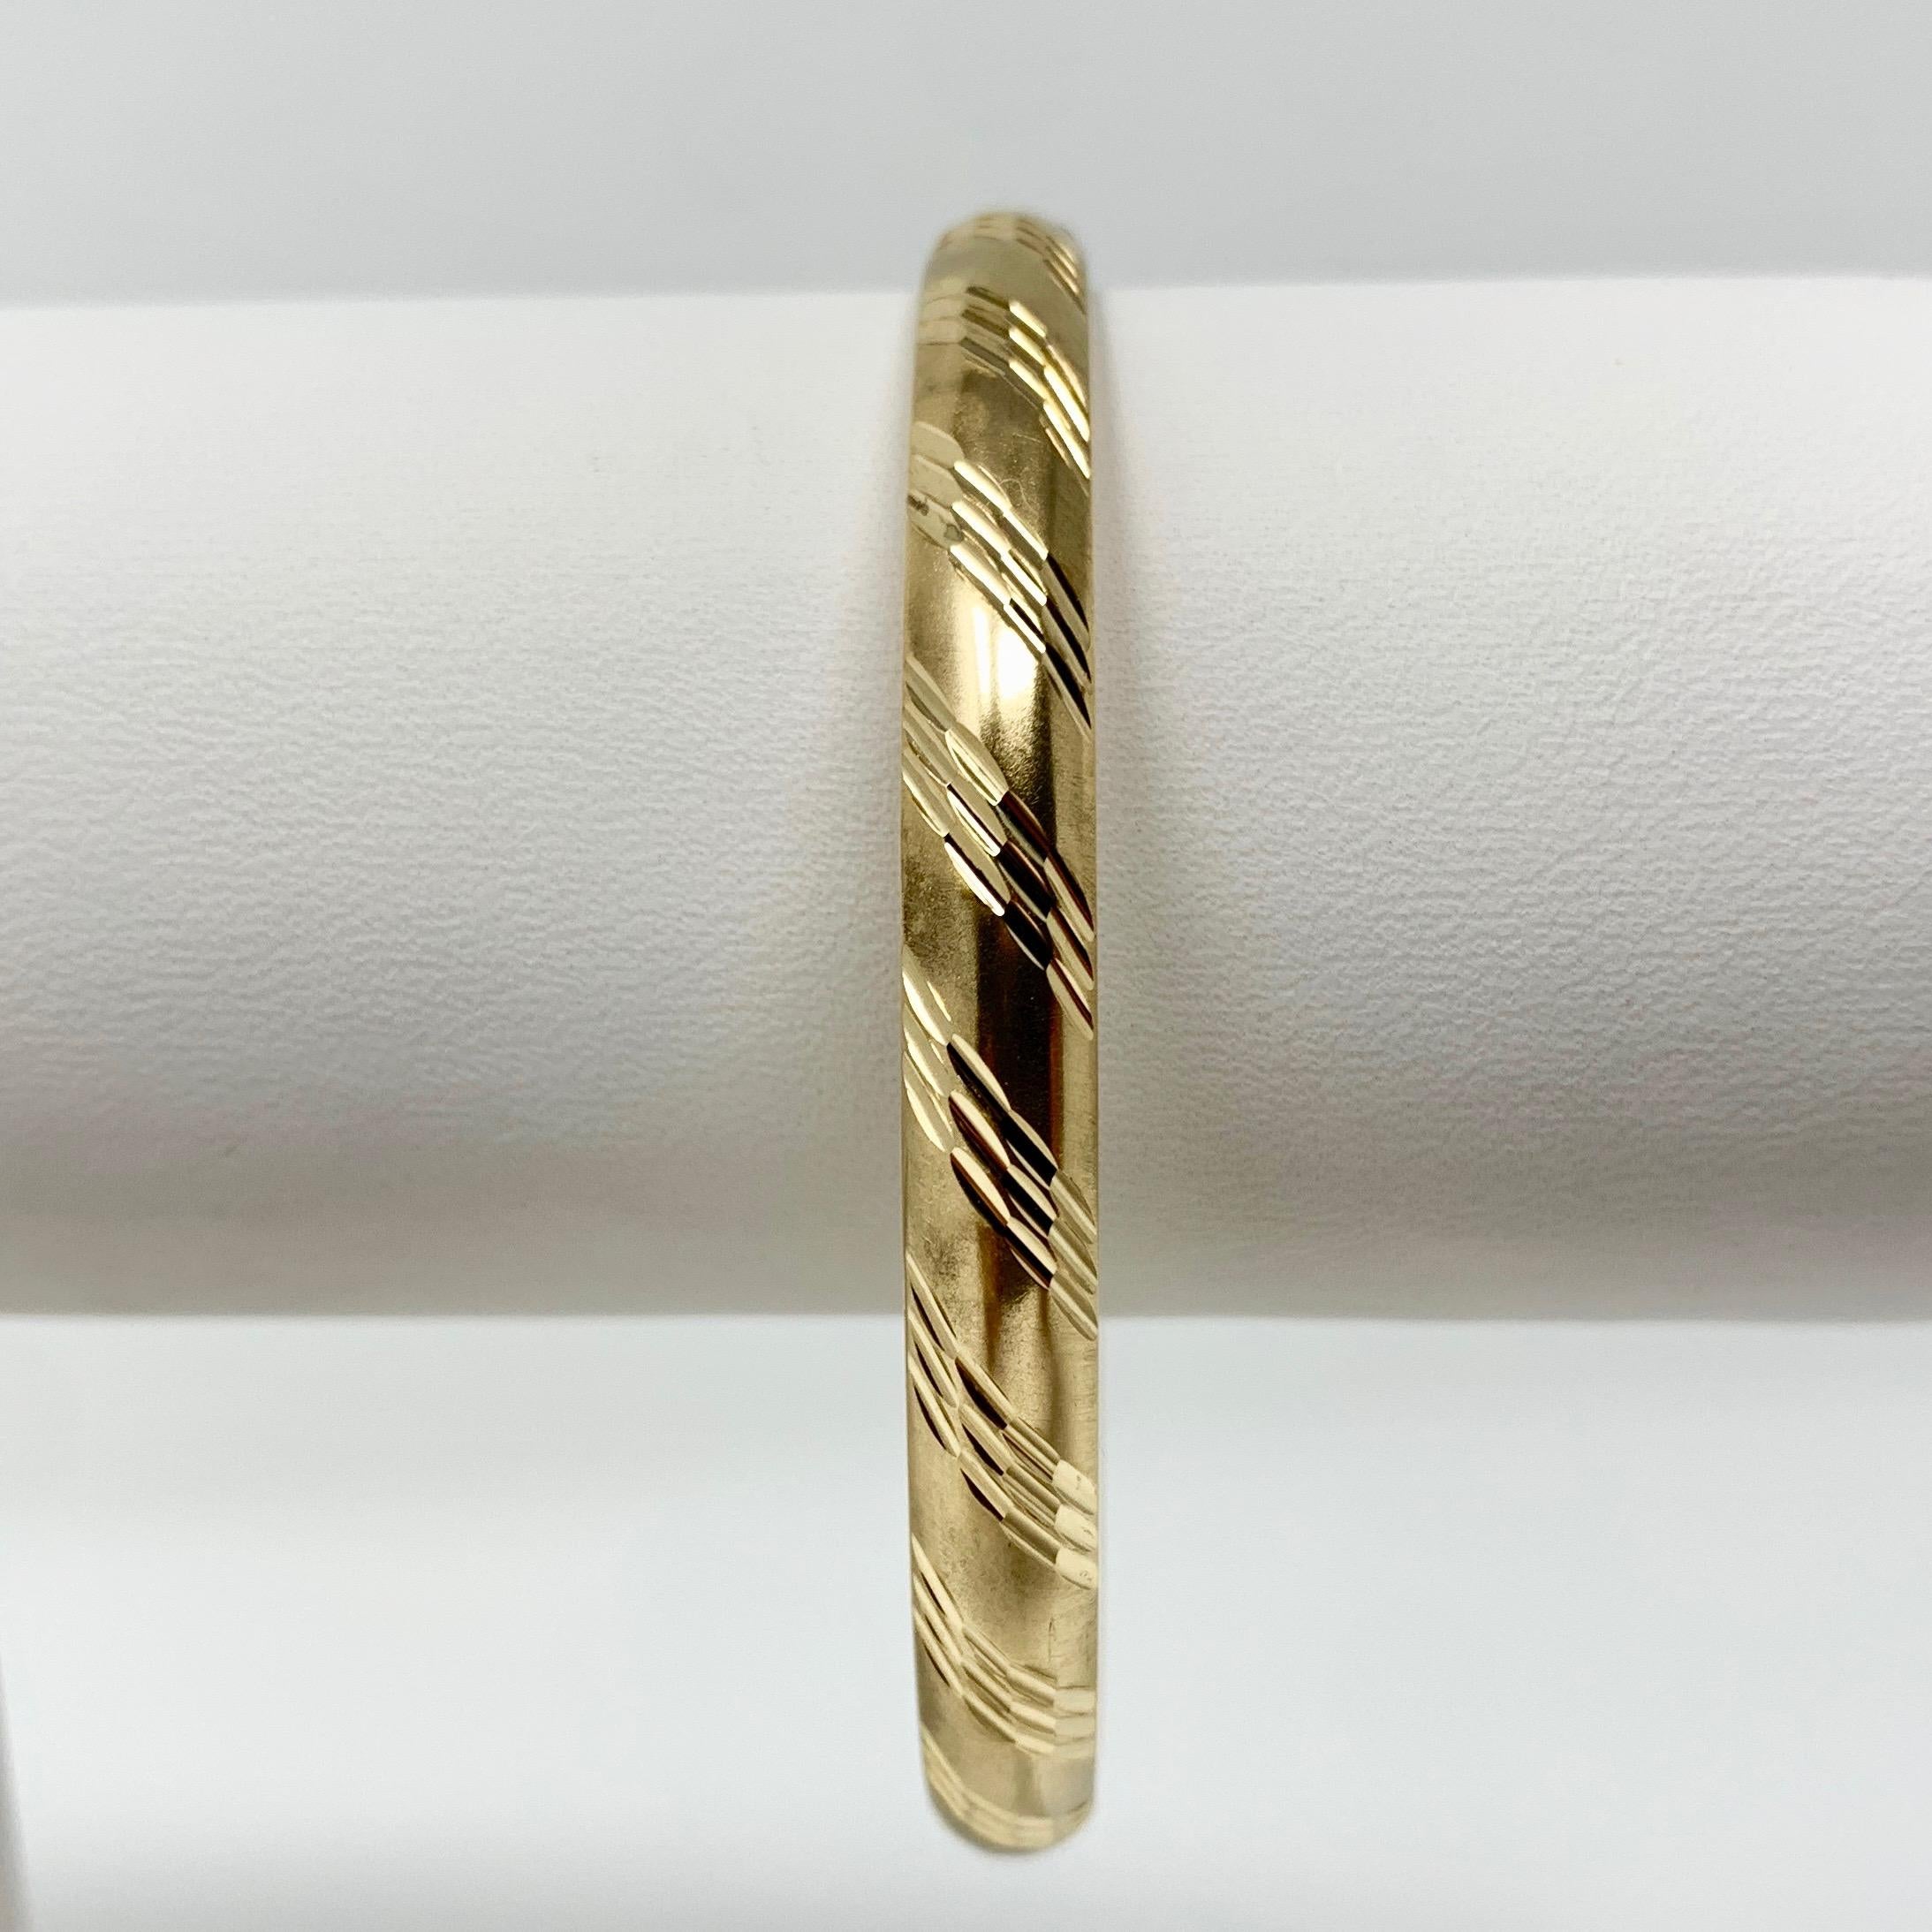 14k Yellow Gold Satin Finish Etched Diamond Cut Bangle Bracelet 7 Inches

Condition:  Excellent Condition, Professionally Cleaned and Polished
Metal:  14k Gold (Marked, and Professionally Tested)
Weight:  8.7g
Length:  7 Inches 
Width:  6mm